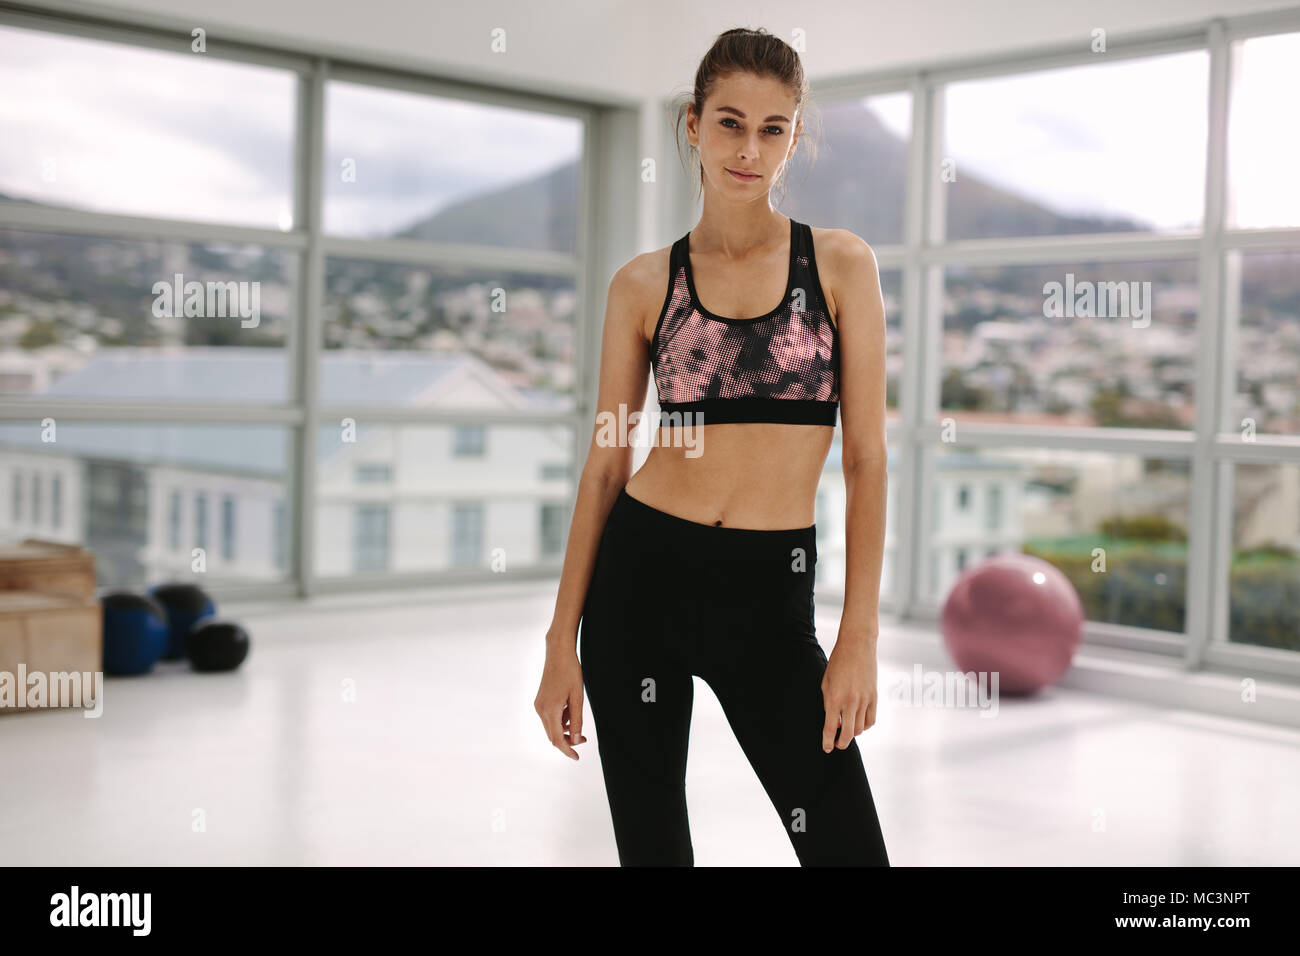 Portrait of woman with slim body standing at fitness studio. Beautiful female in sportswear standing in gym and looking at camera. Stock Photo